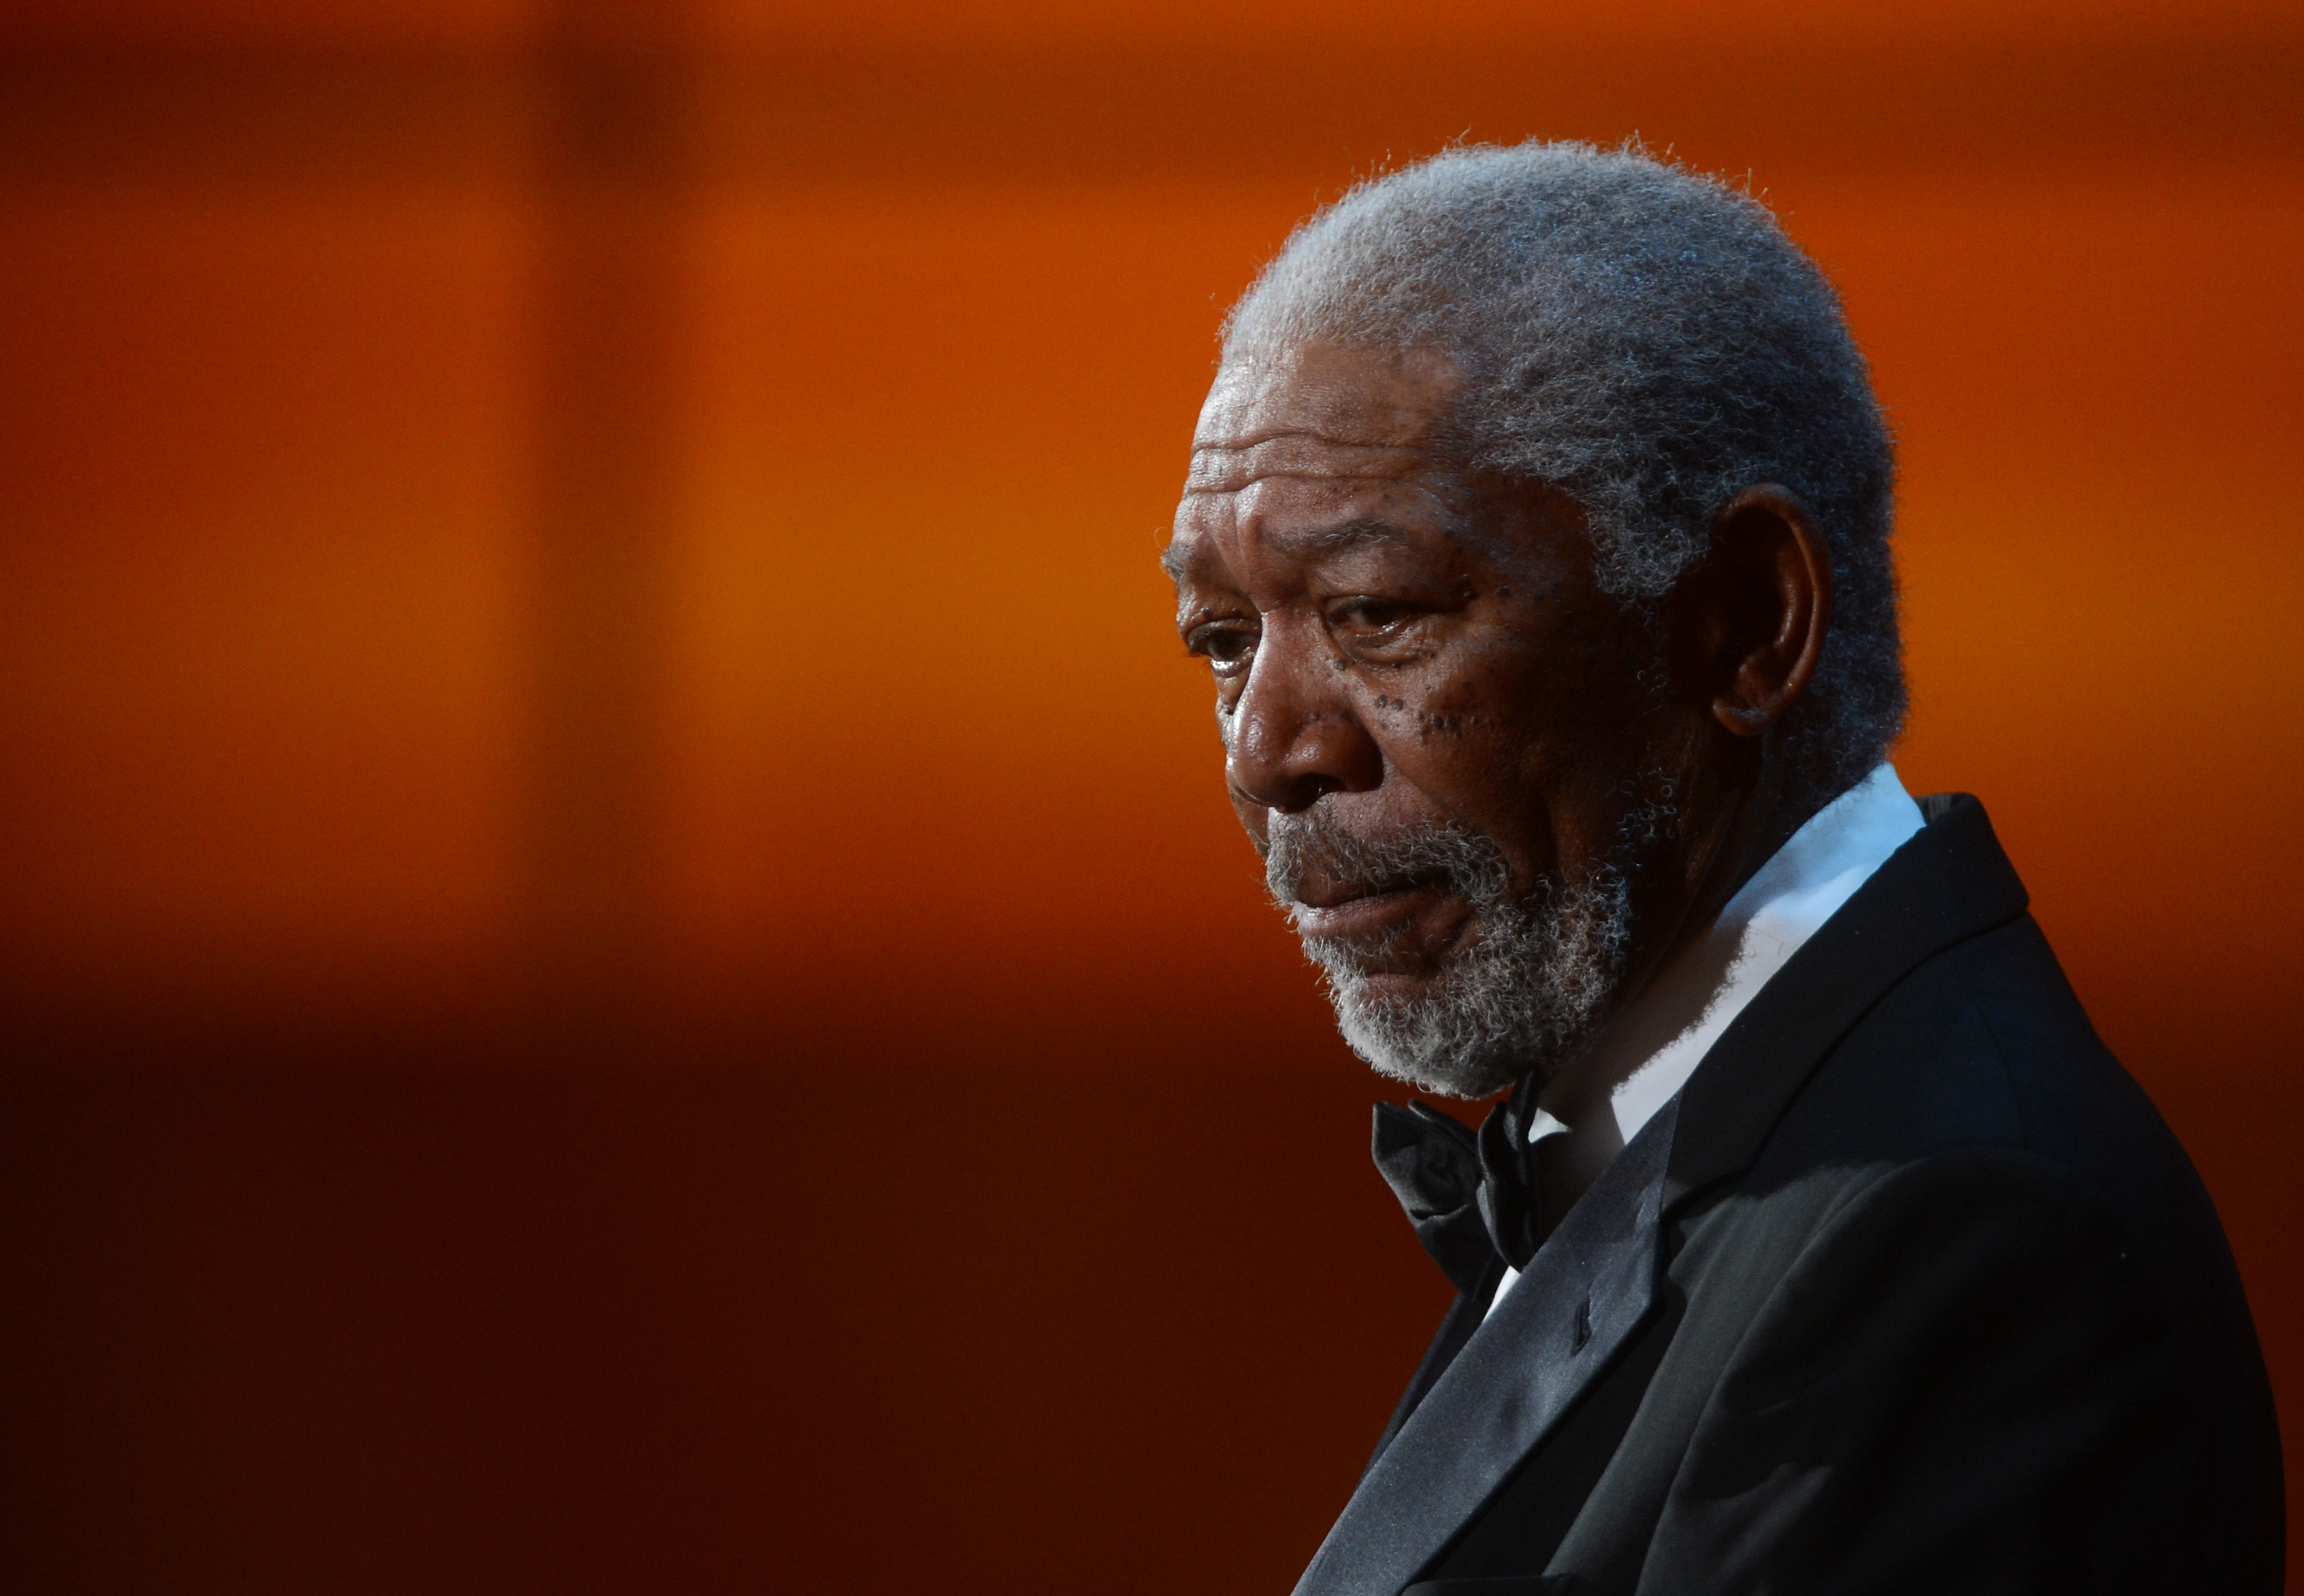 Morgan Freeman speaks onstage at the 40th AFI Life Achievement Award at Sony Pictures Studios on June 7, 2012 in Culver City, California. | Source: Getty Images